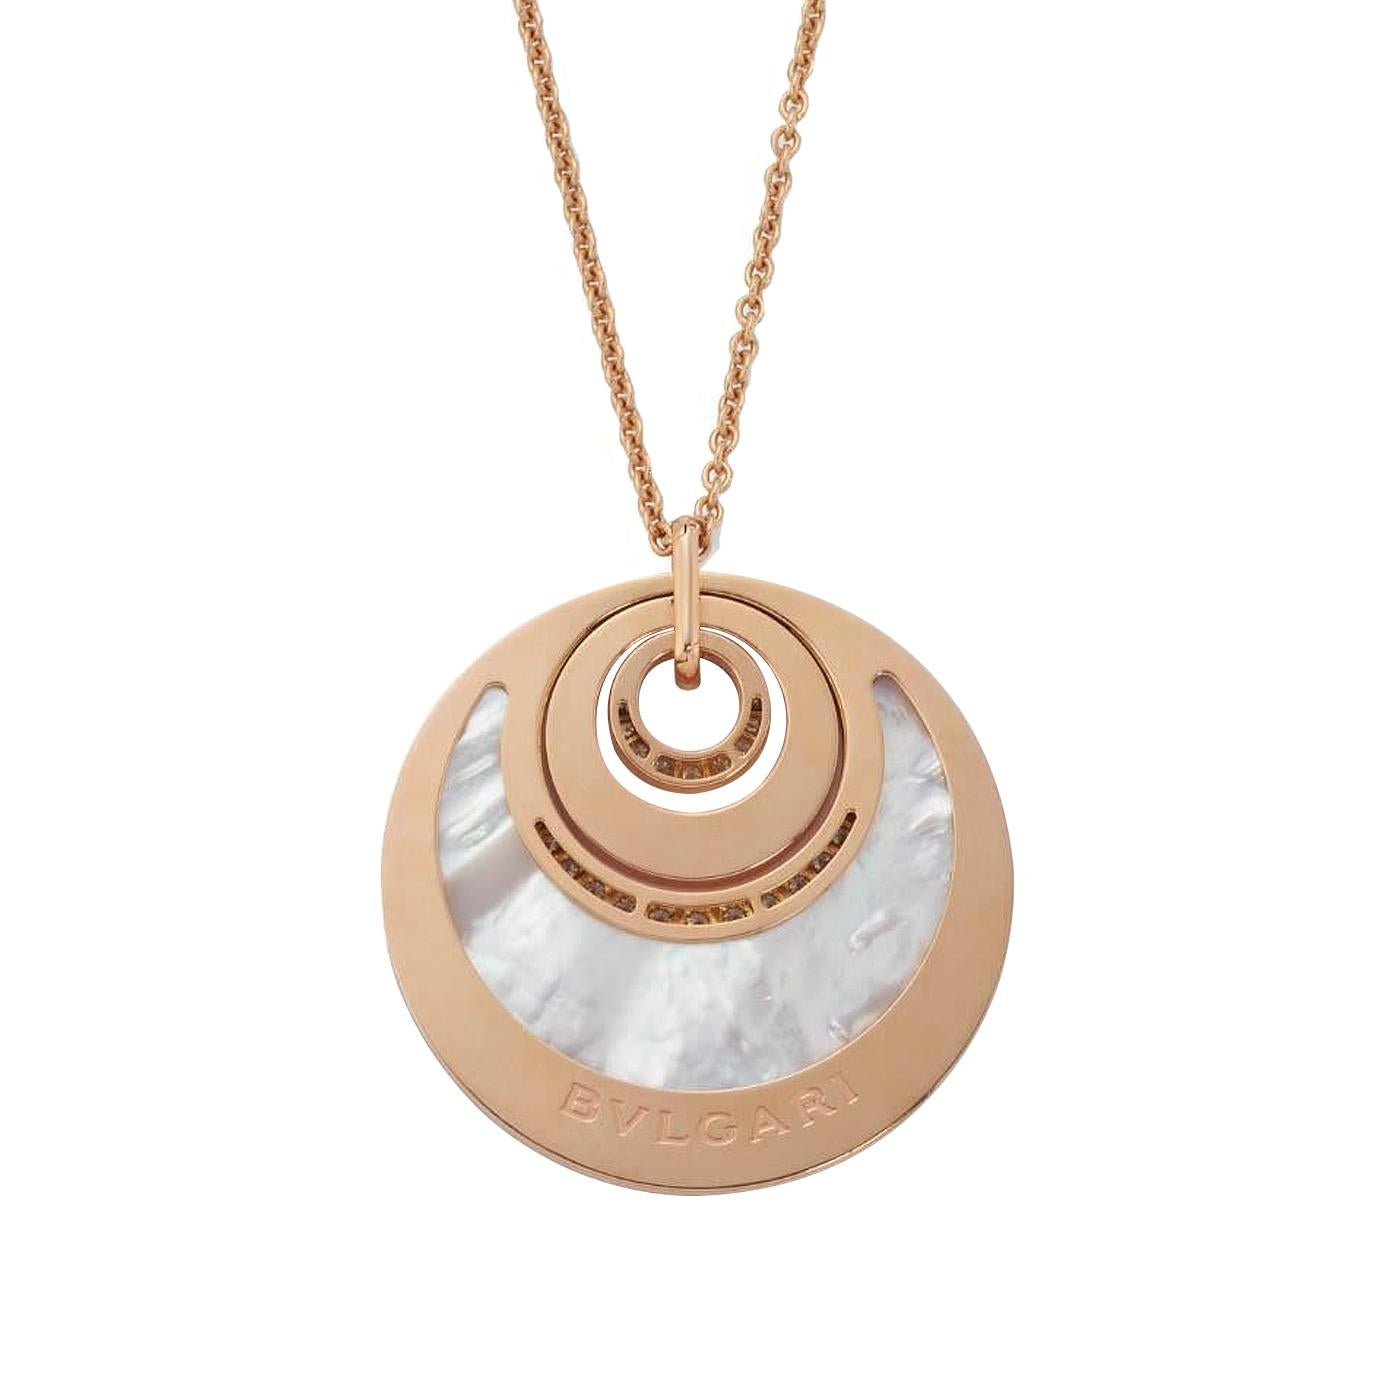 Round Cut Bvlgari Intarsio Diamond and Mother of Pearl Pendant Necklace 18k Rose Gold For Sale